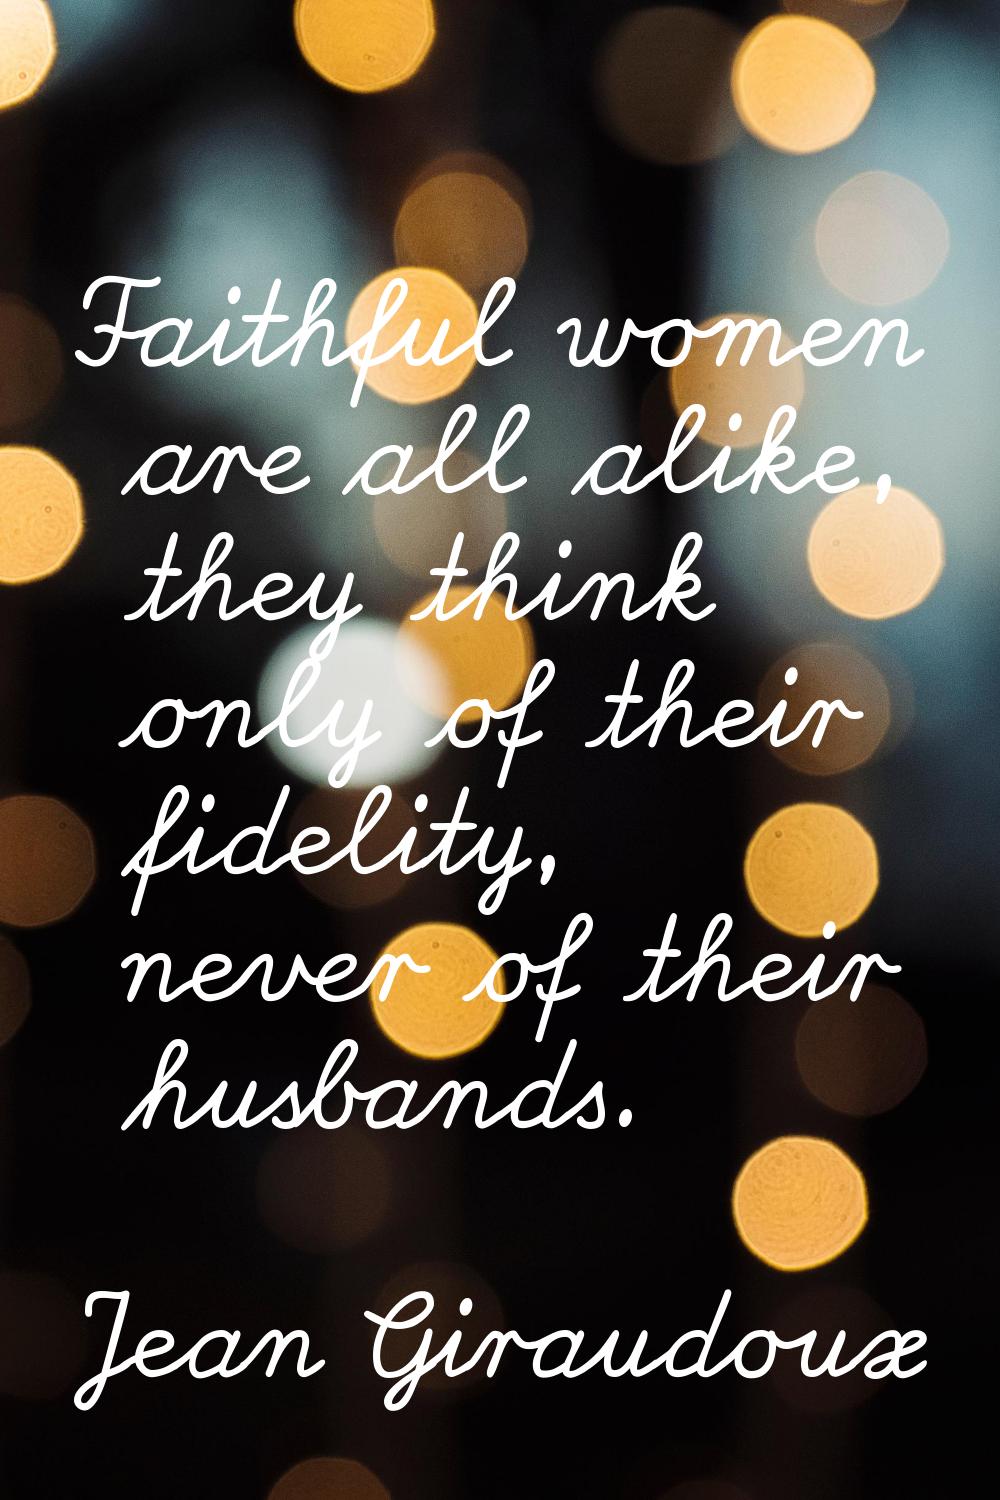 Faithful women are all alike, they think only of their fidelity, never of their husbands.